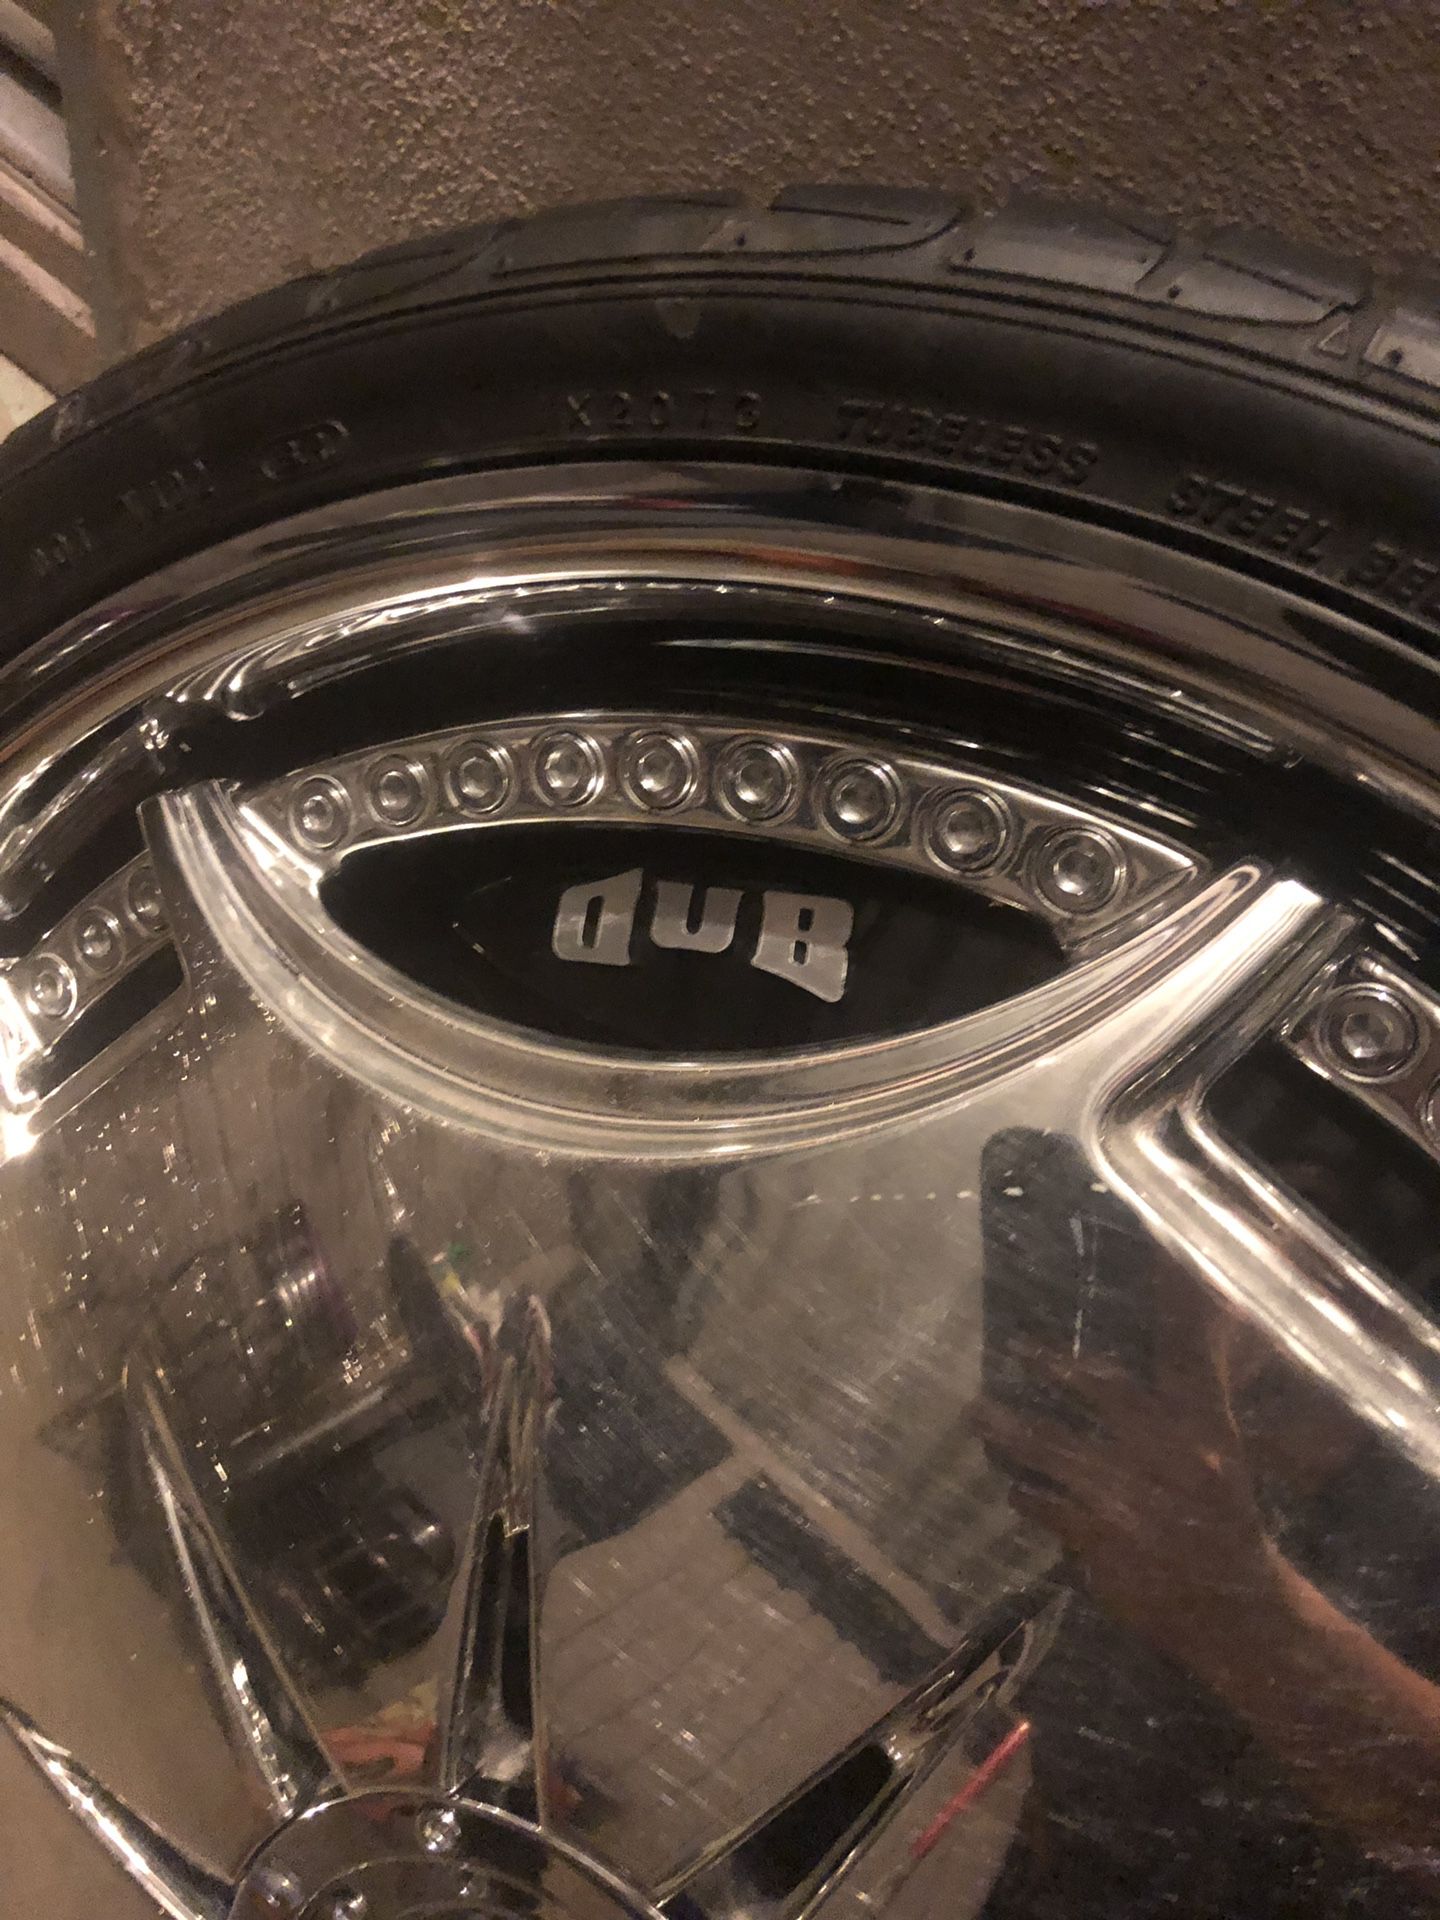 22 inch dub rims floaters for Sale in Carmichael, CA - OfferUp